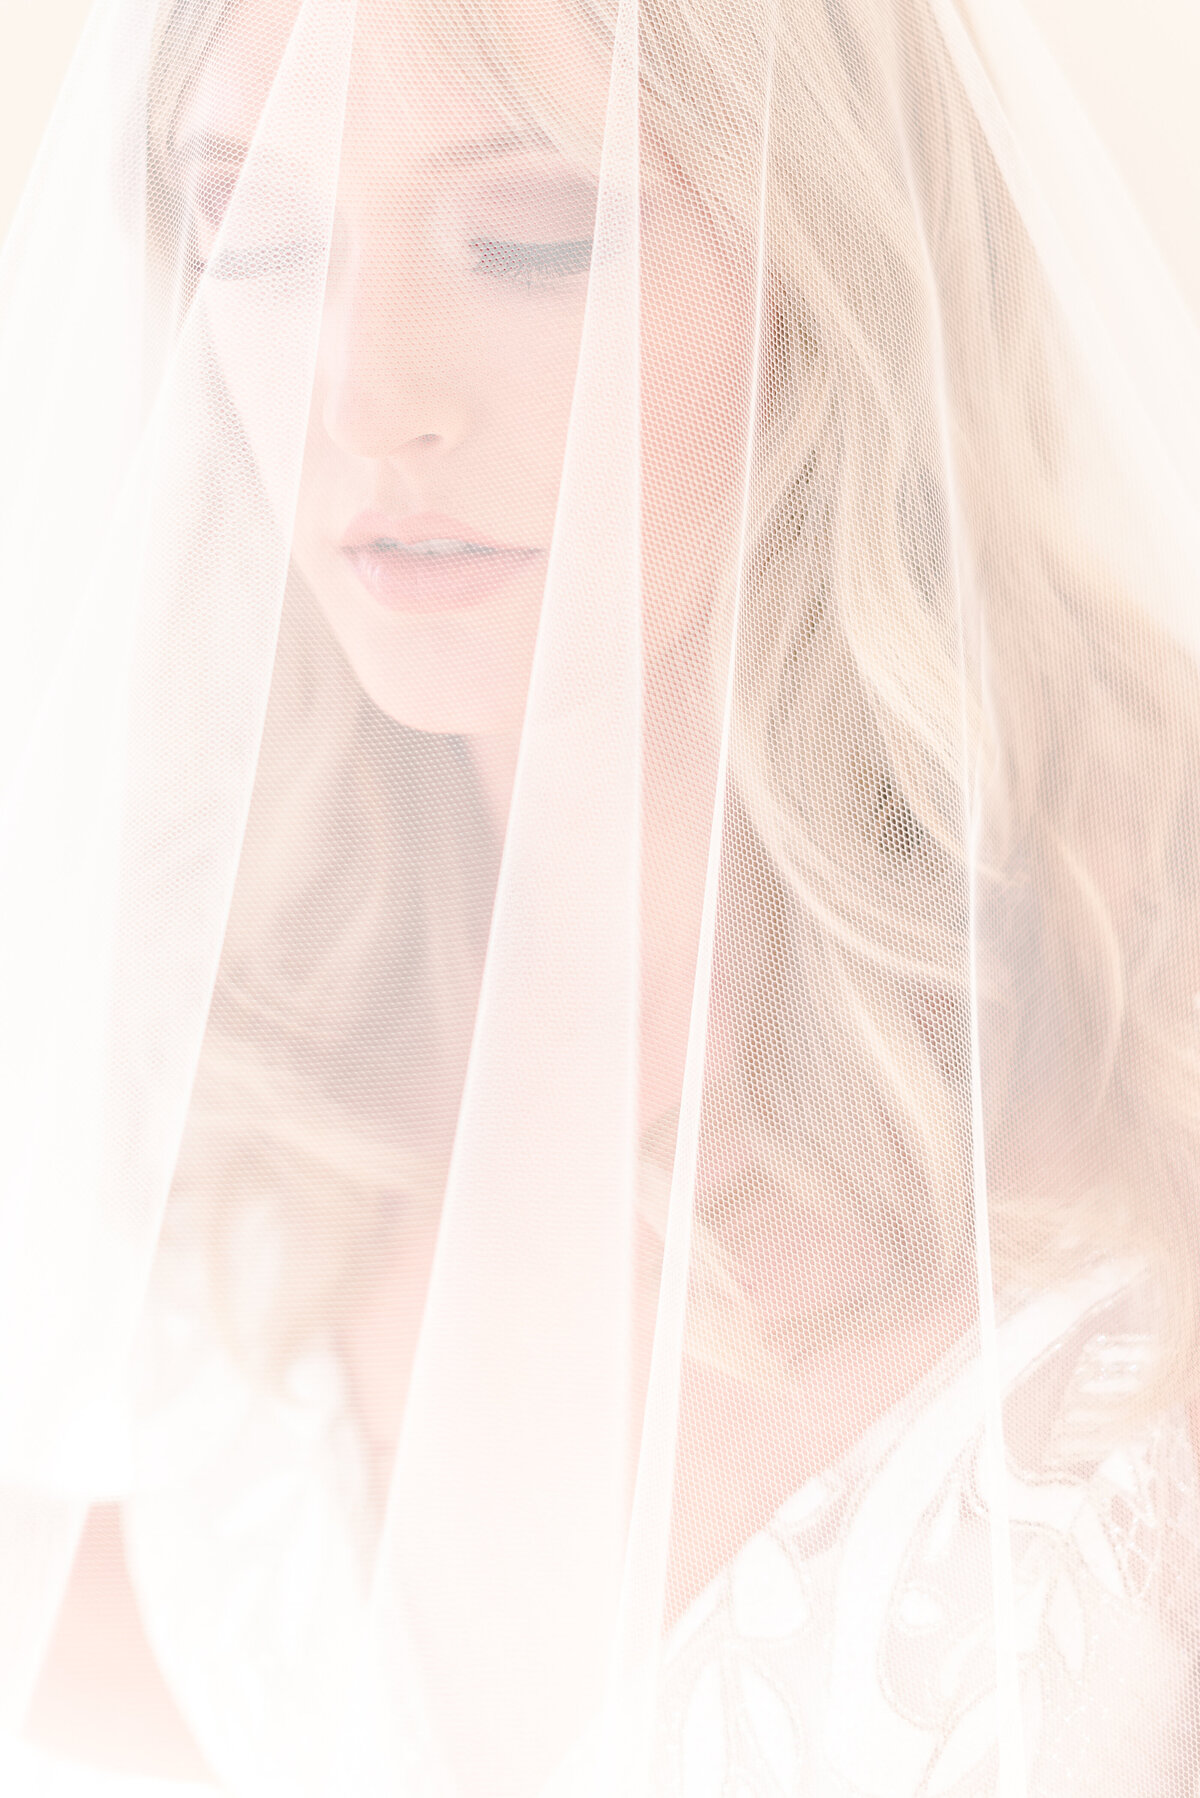 portrait of a bride on her wedding day with a veil in front of her face